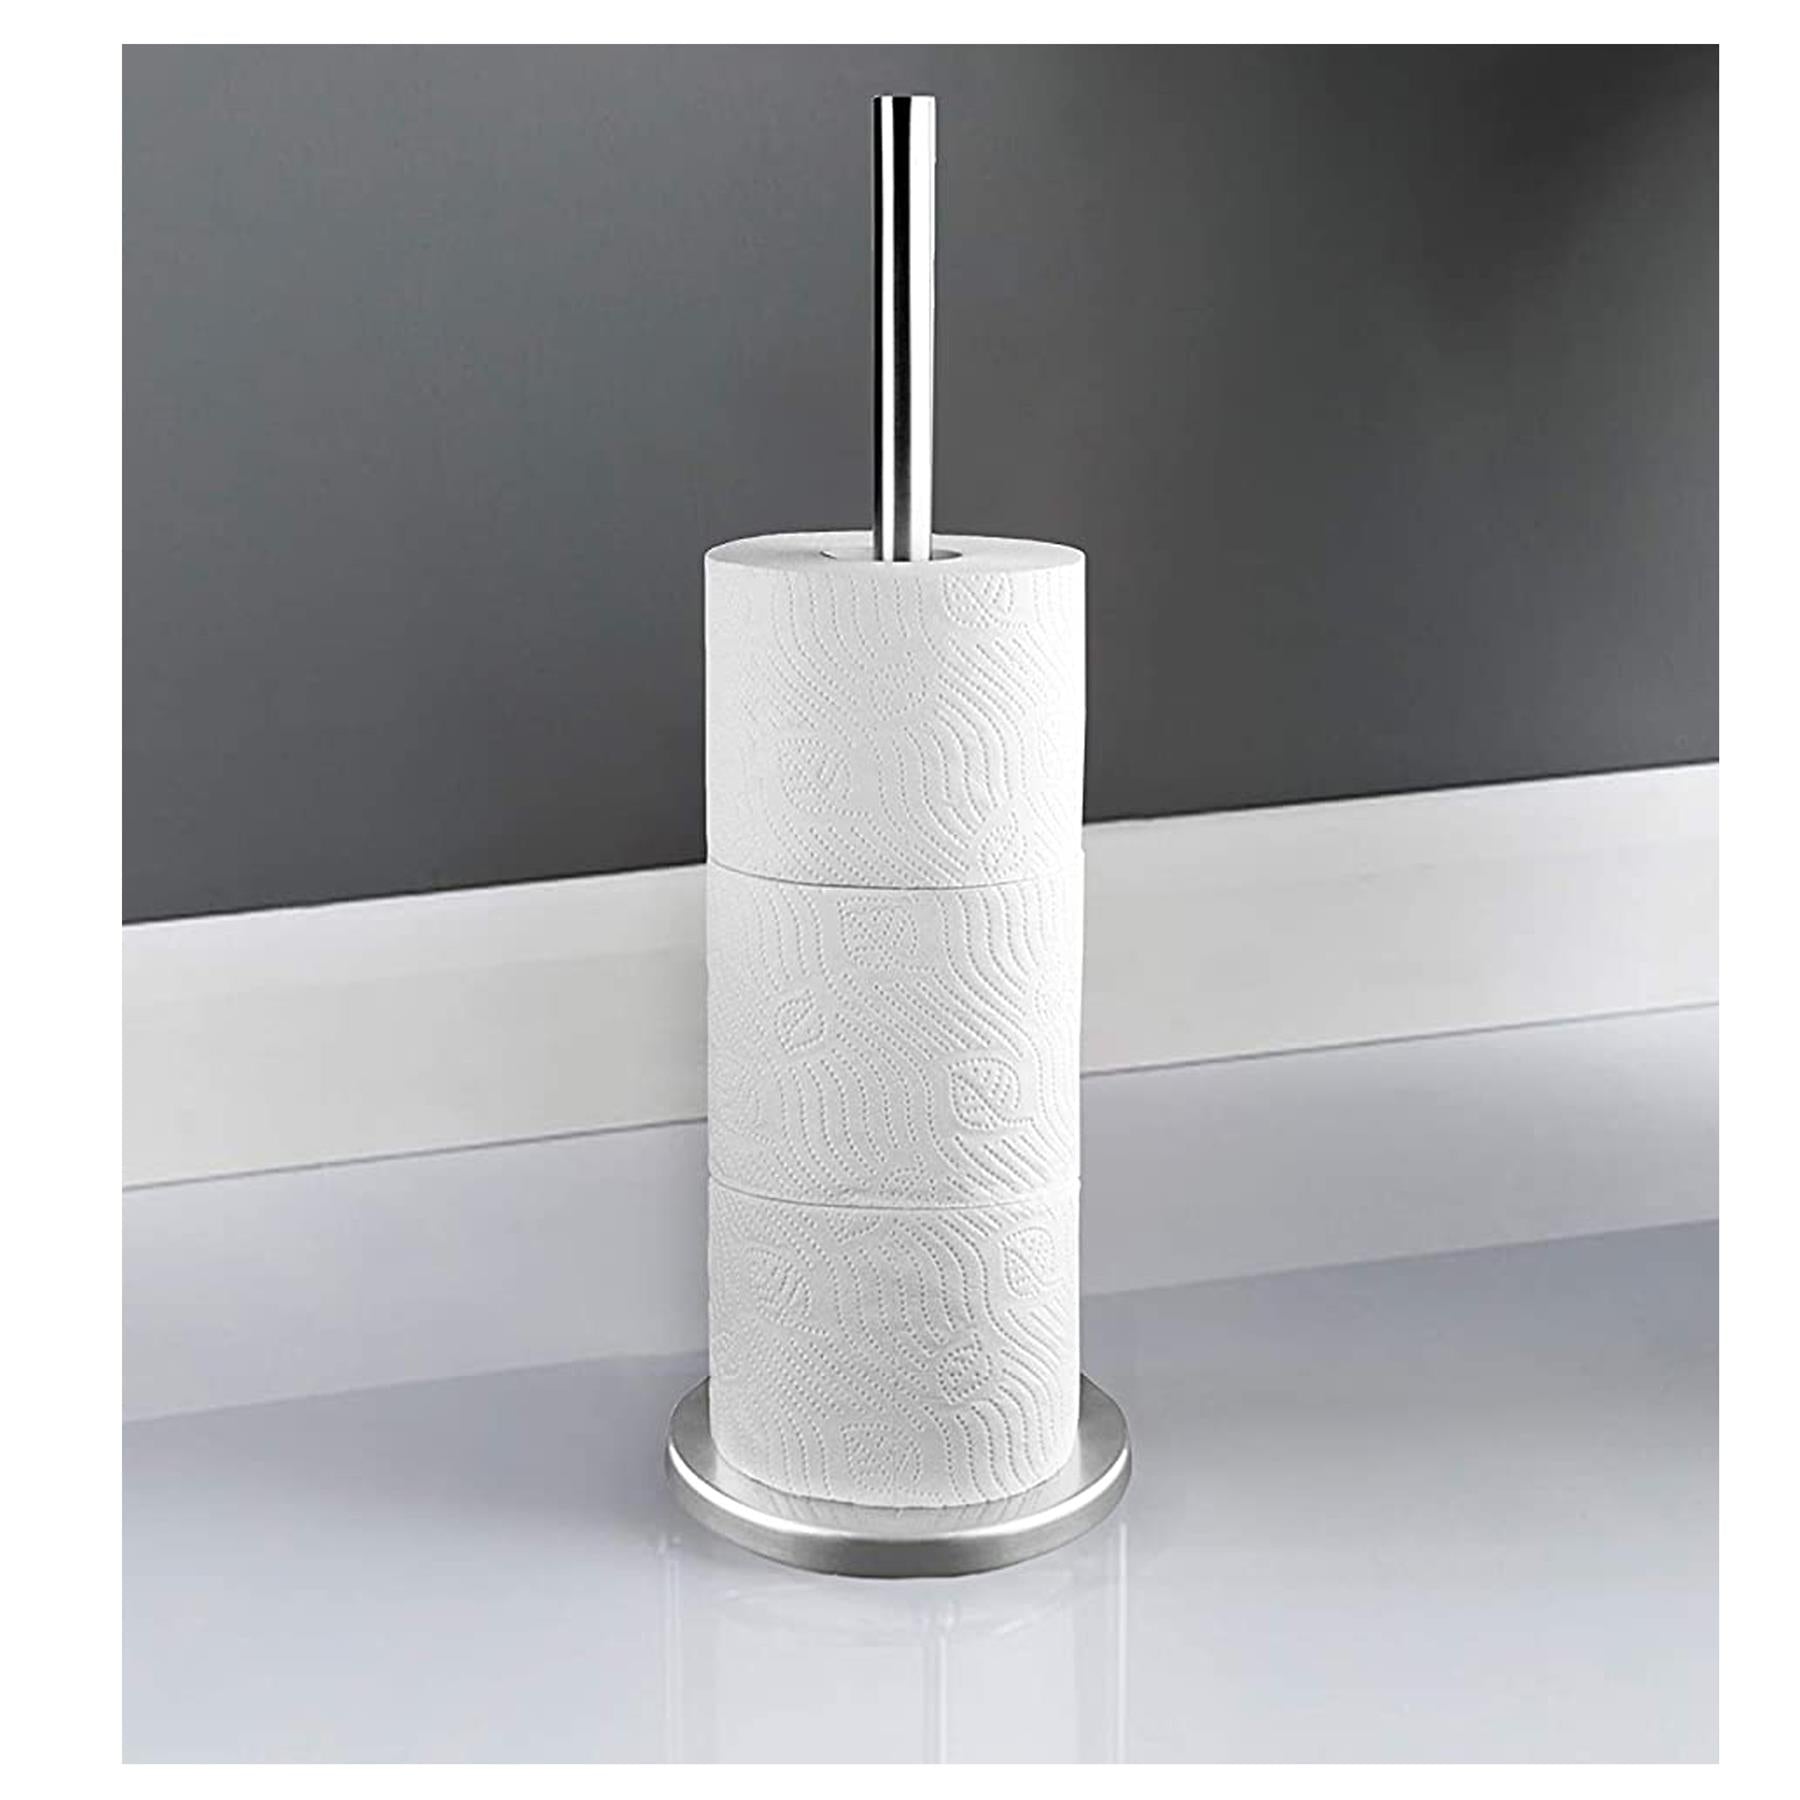 Stainless Steel Bathroom Toilet Paper Roll Holder by MTS - The Magic Toy Shop